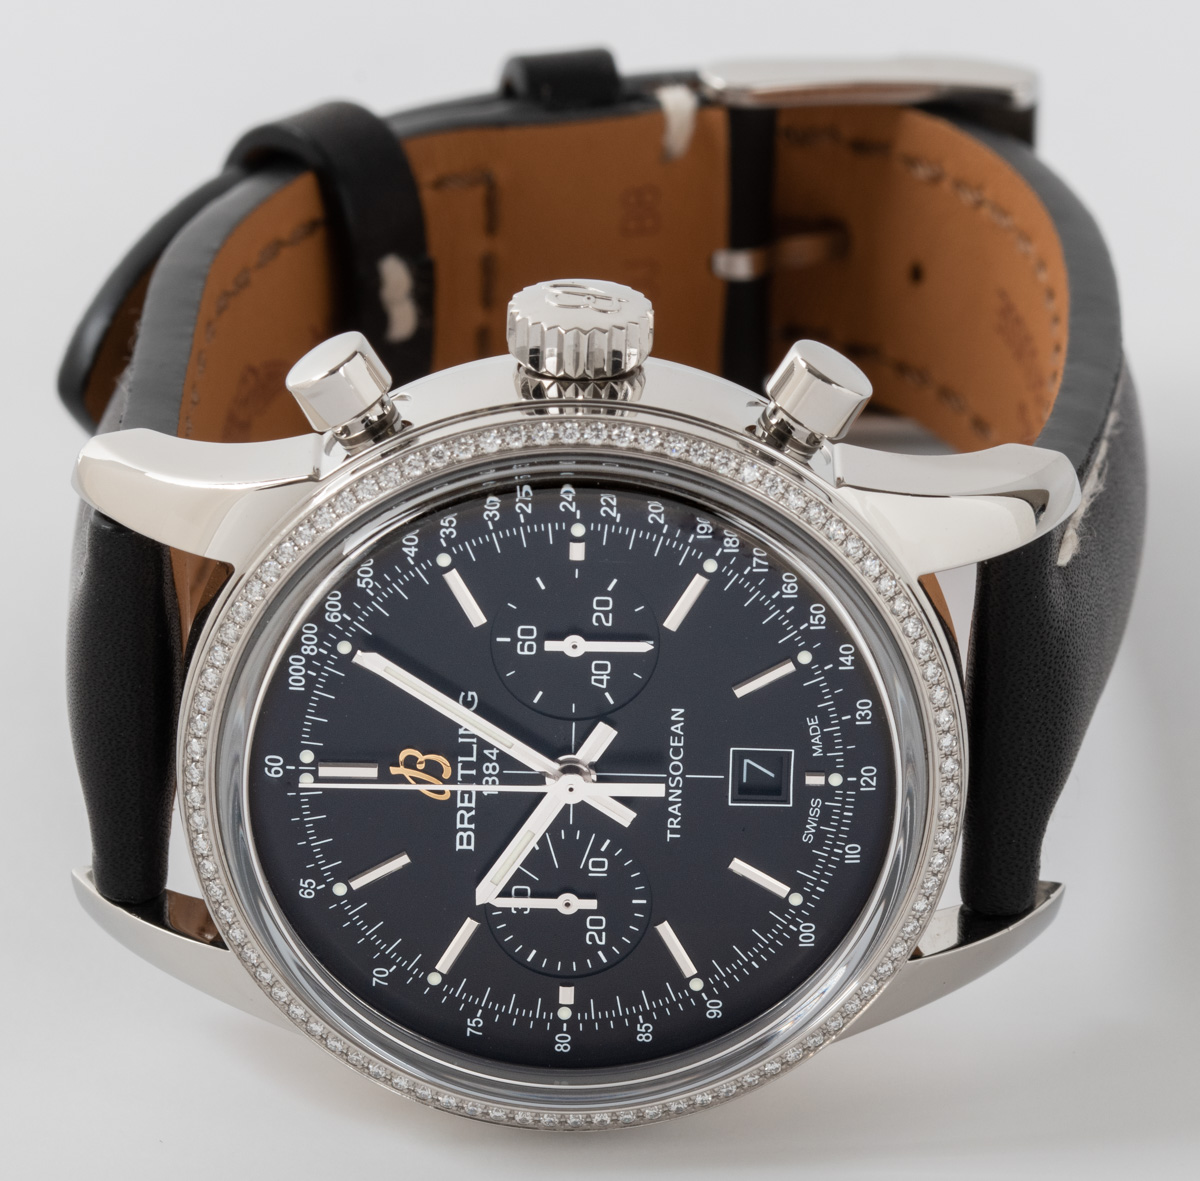 Transocean 38 Leather Strap